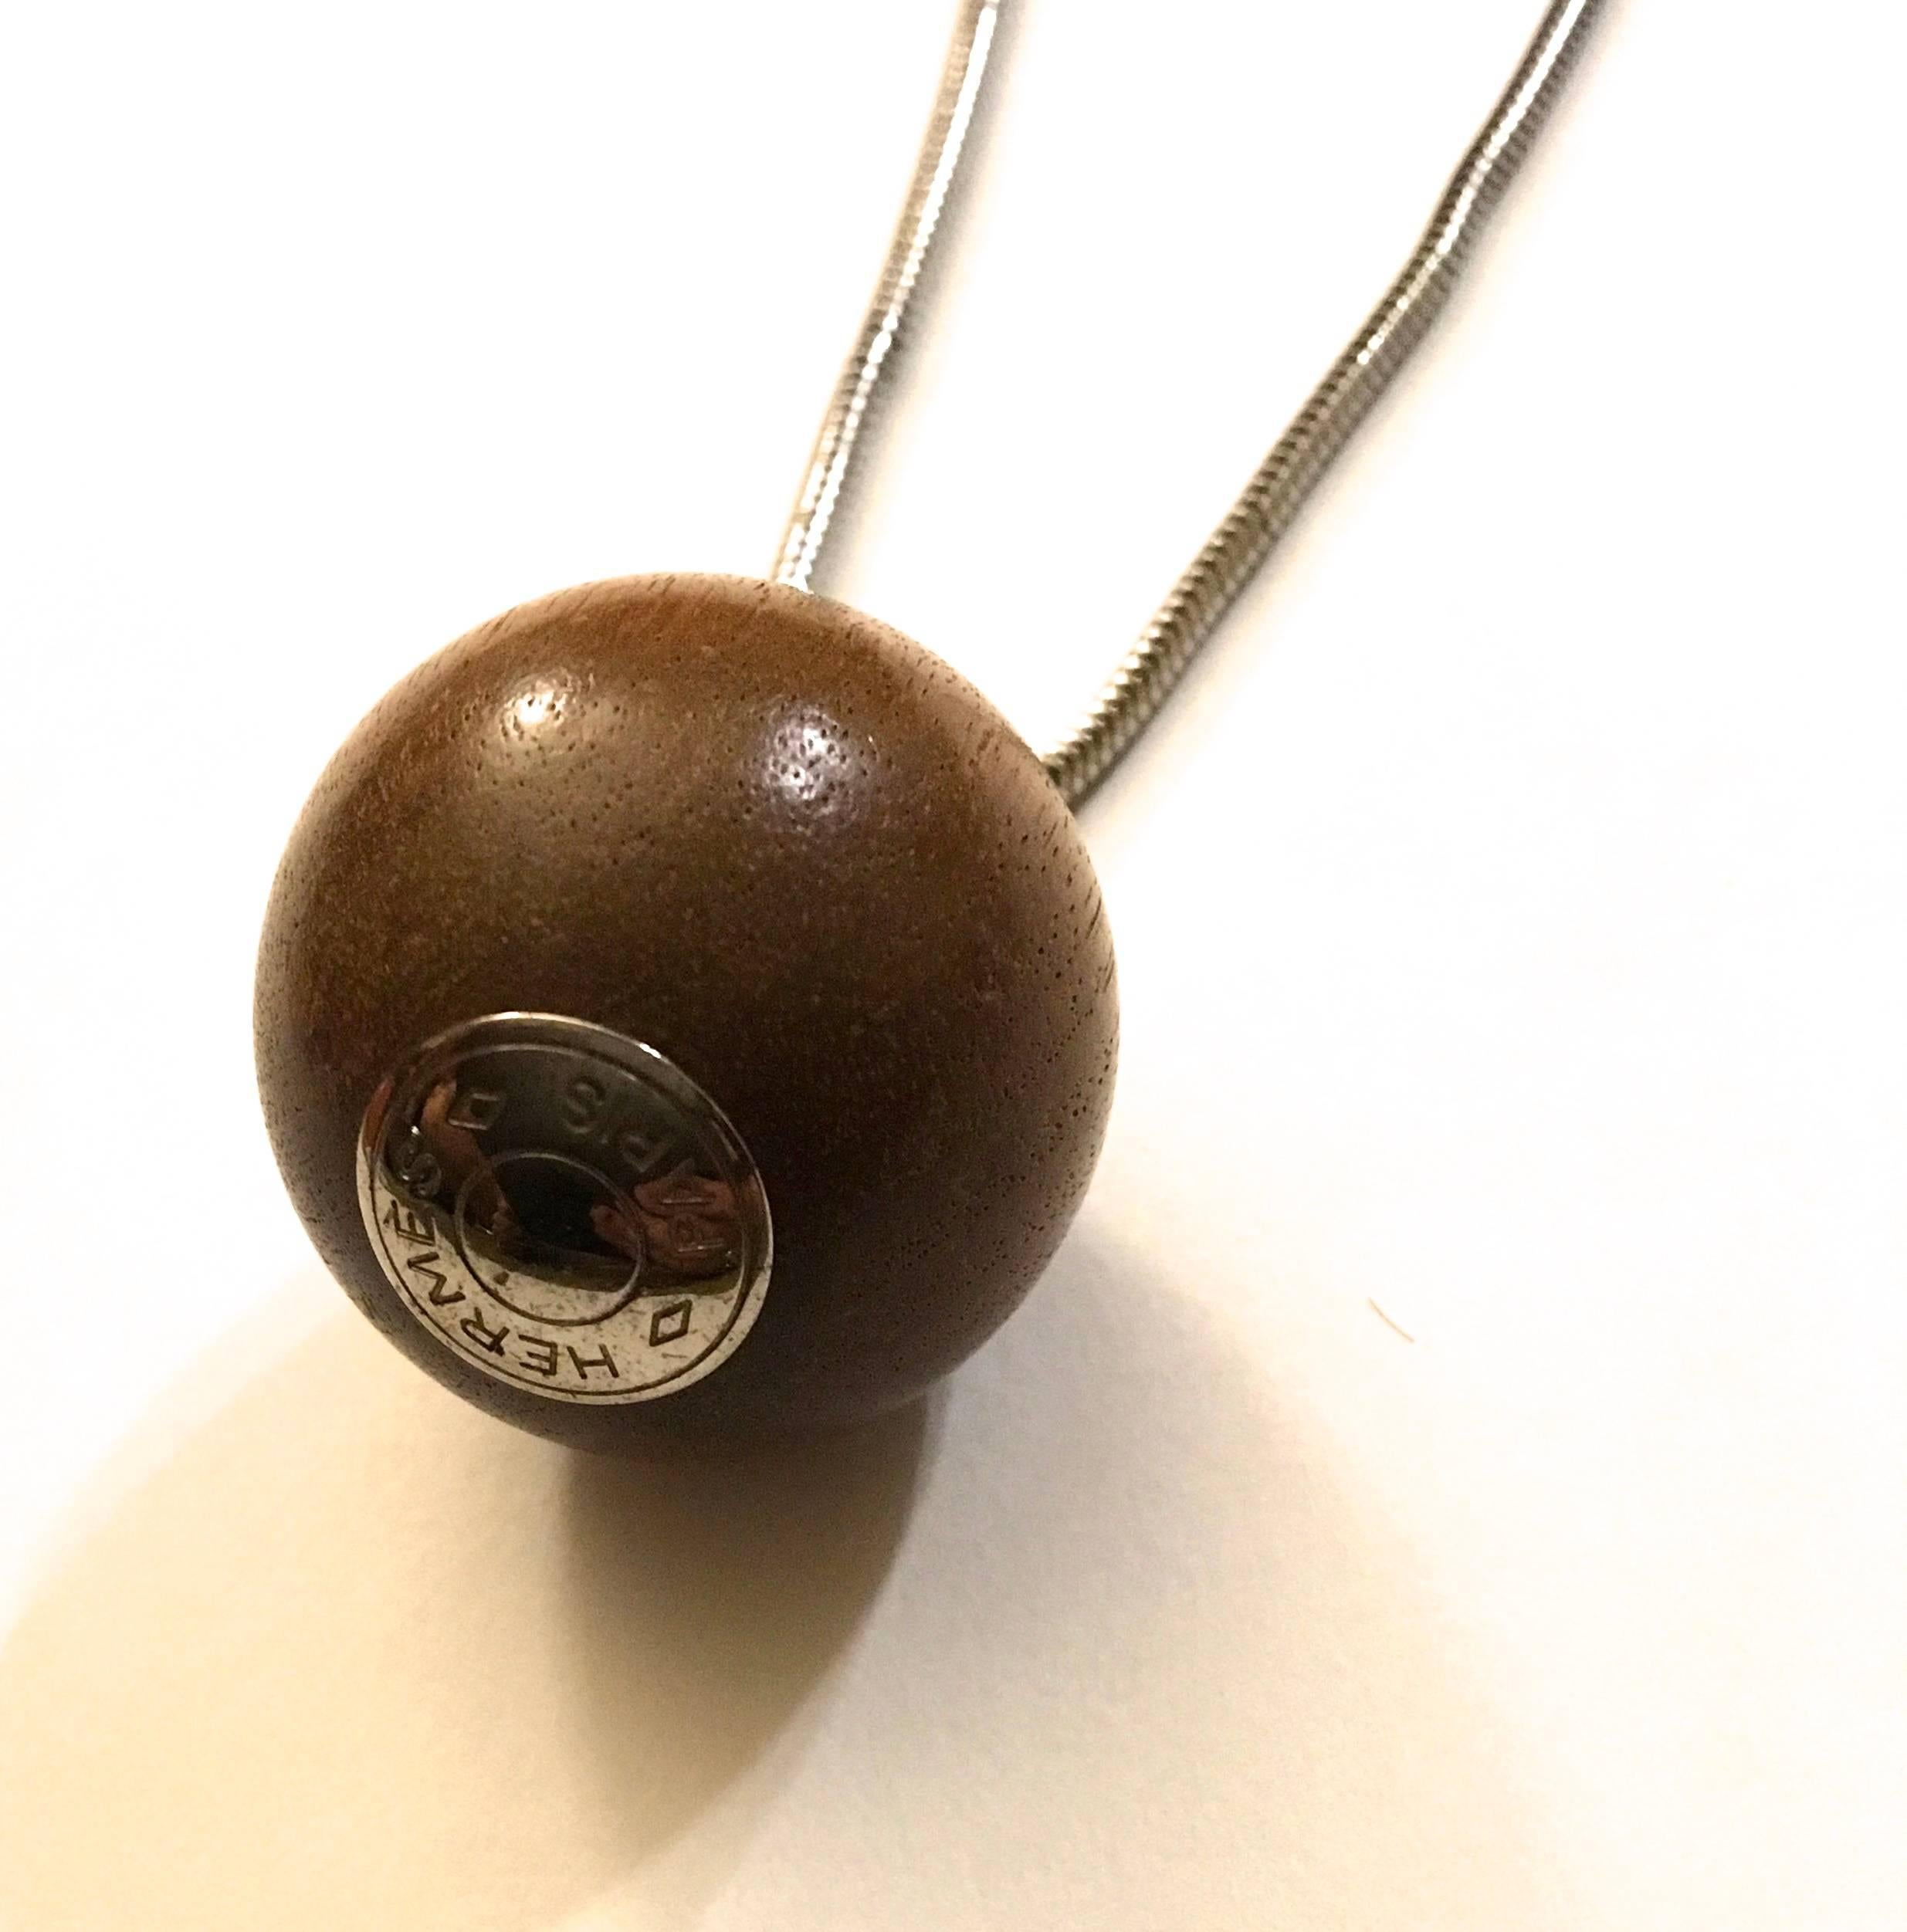 Presented here is a beautiful Hermes necklace with a 24 inch chain and 1 inch round wood ball with silver at the bottom which read HERMES PARIS.